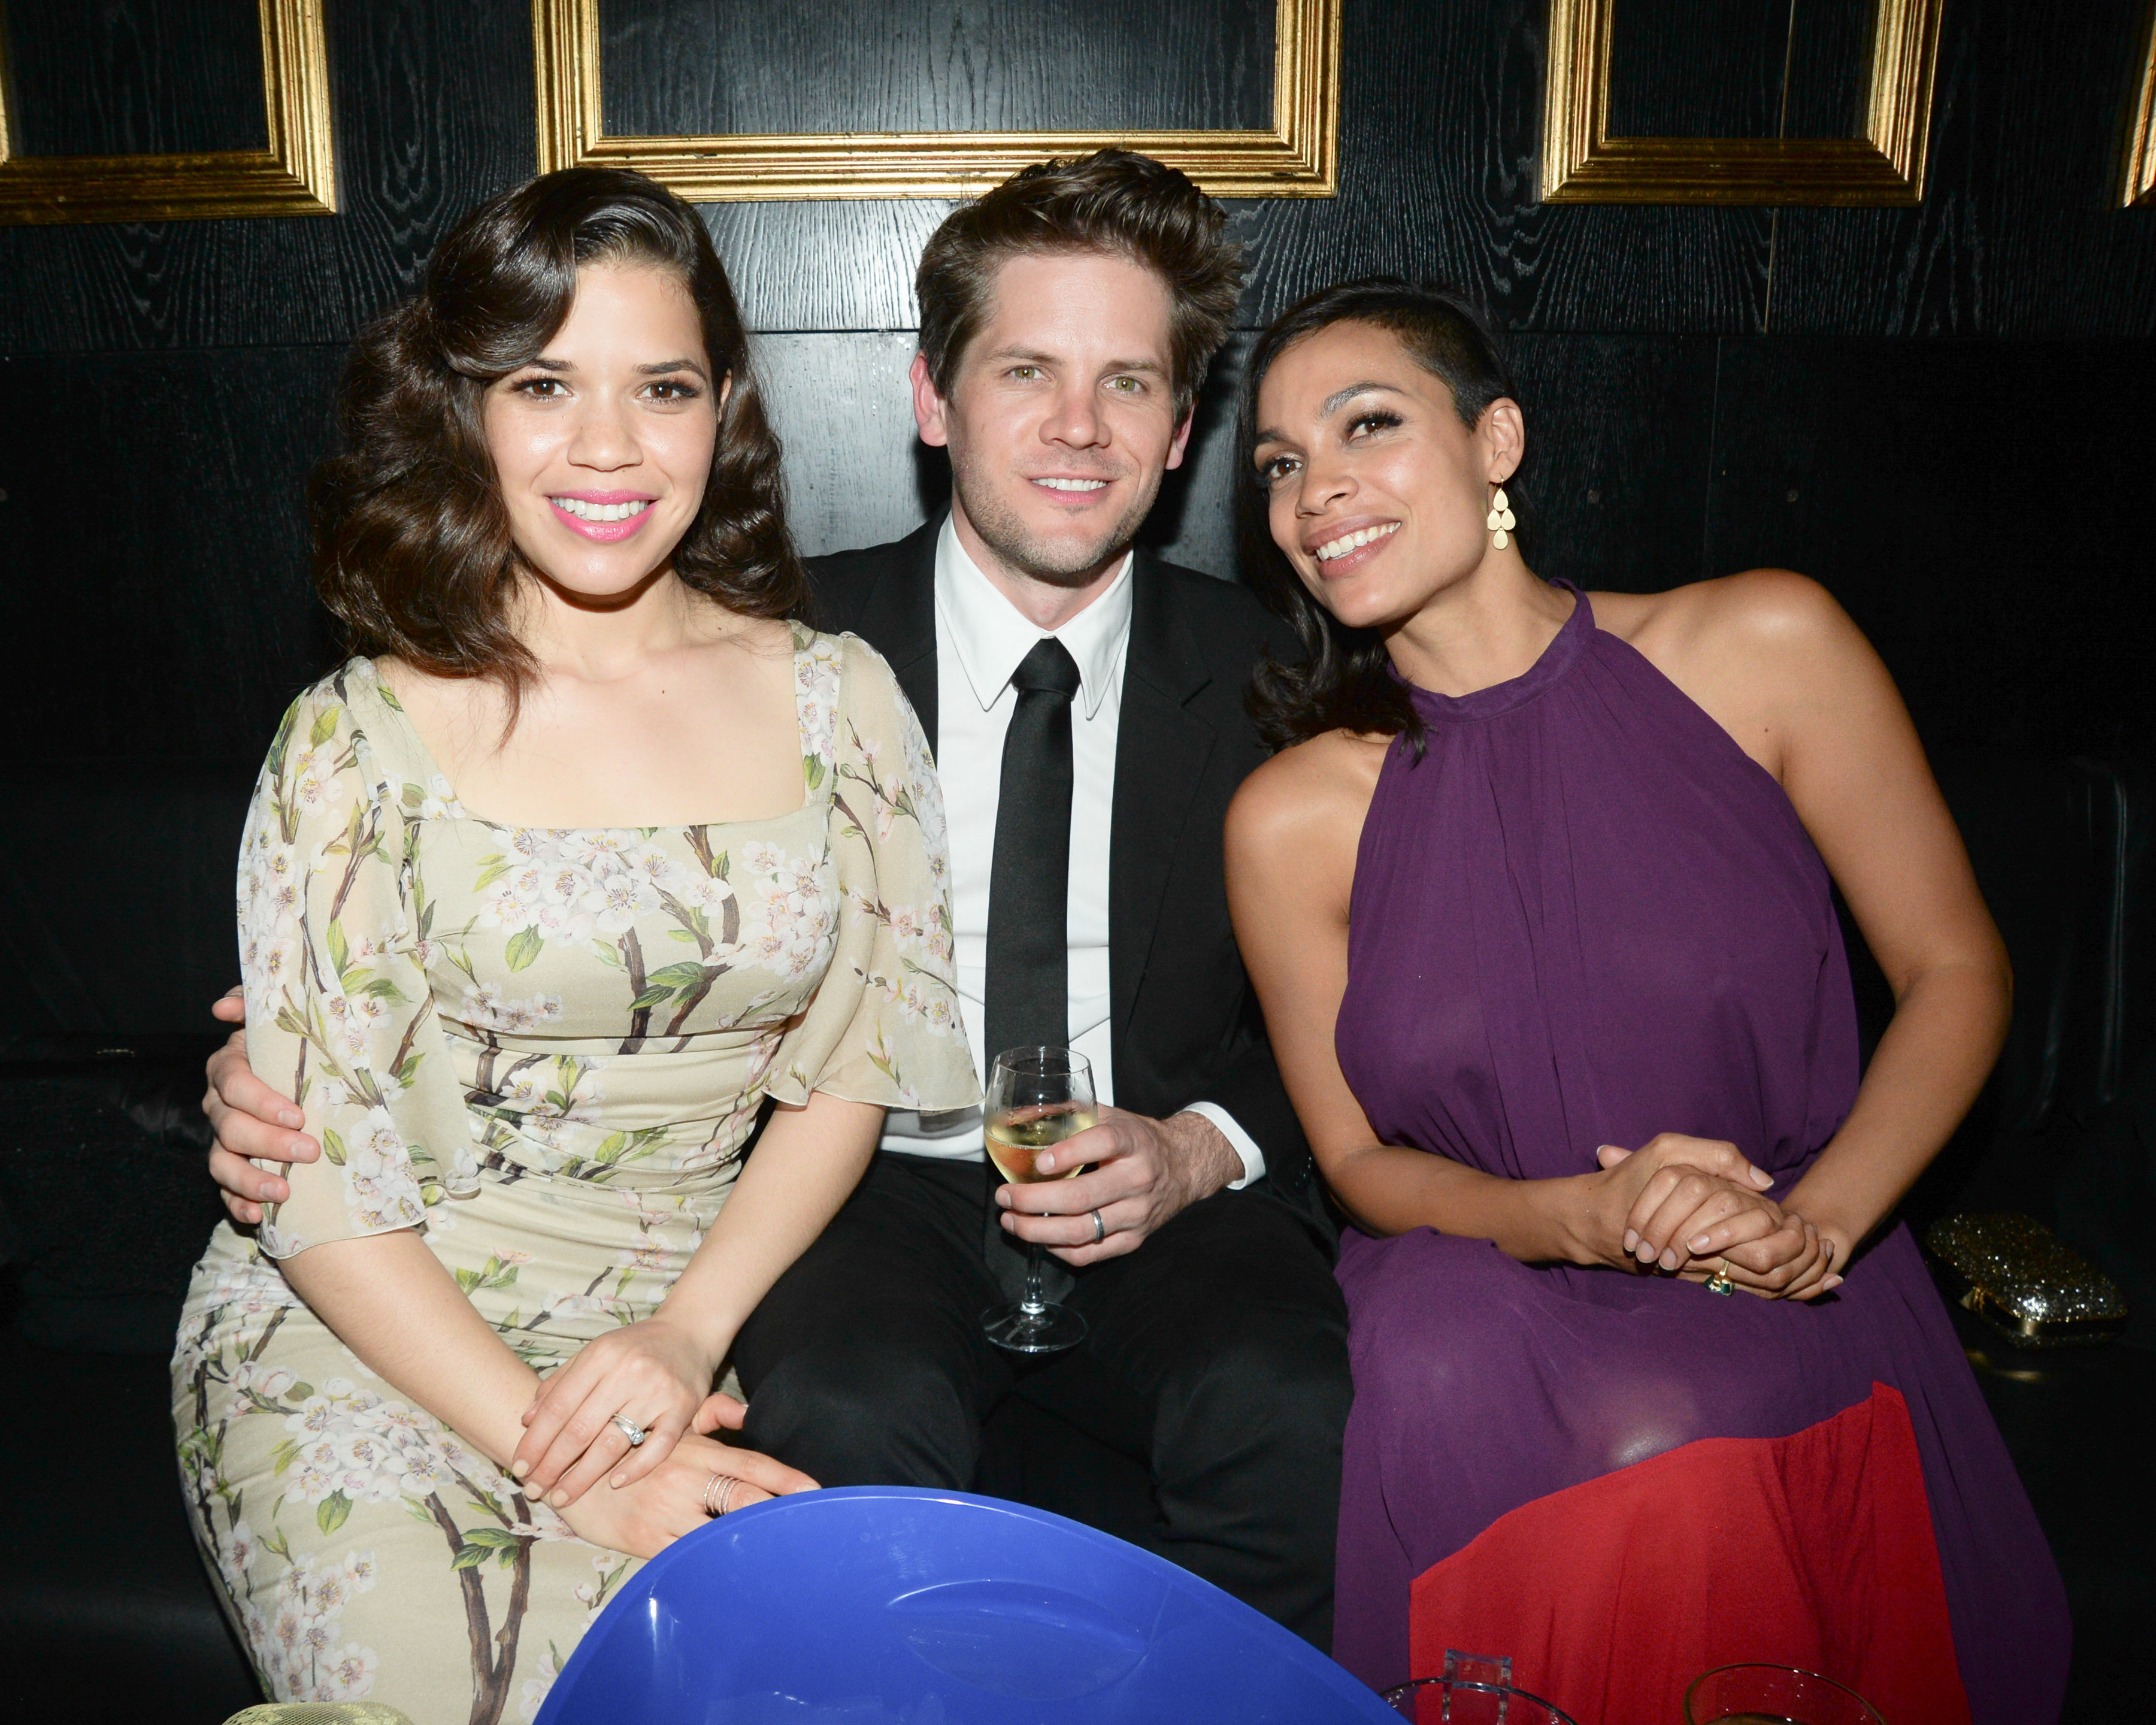 America Ferrera, Ryan Piers Williams, Rosario Dawson - Bungalow 8 Cannes Film Festival Pop Up with The Weinstein Company and Worldview Entertainment